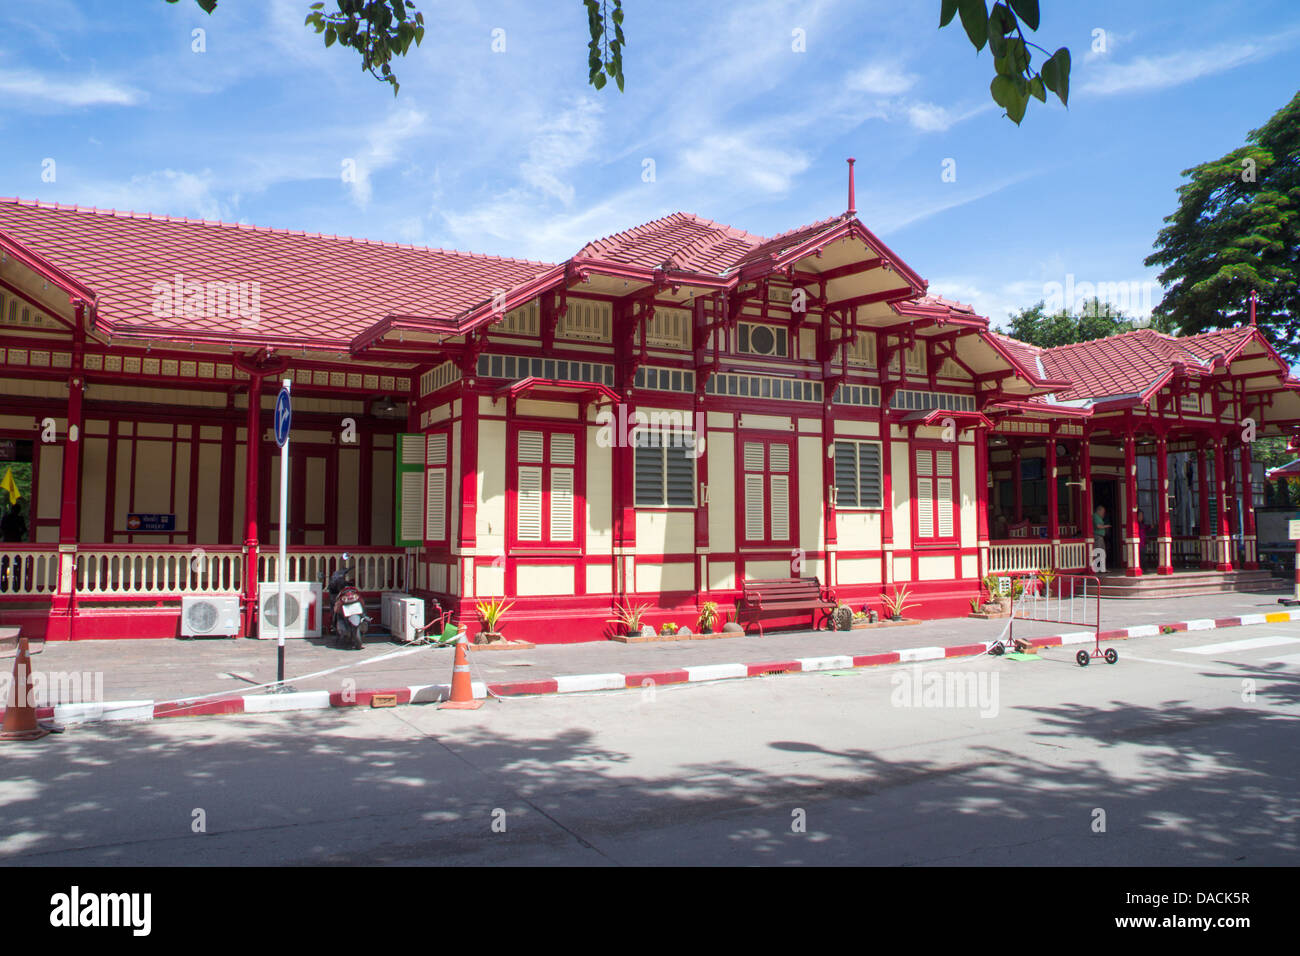 The front of Hua Hin railway station in Prchuap Khiri Khan province, Thailand Stock Photo